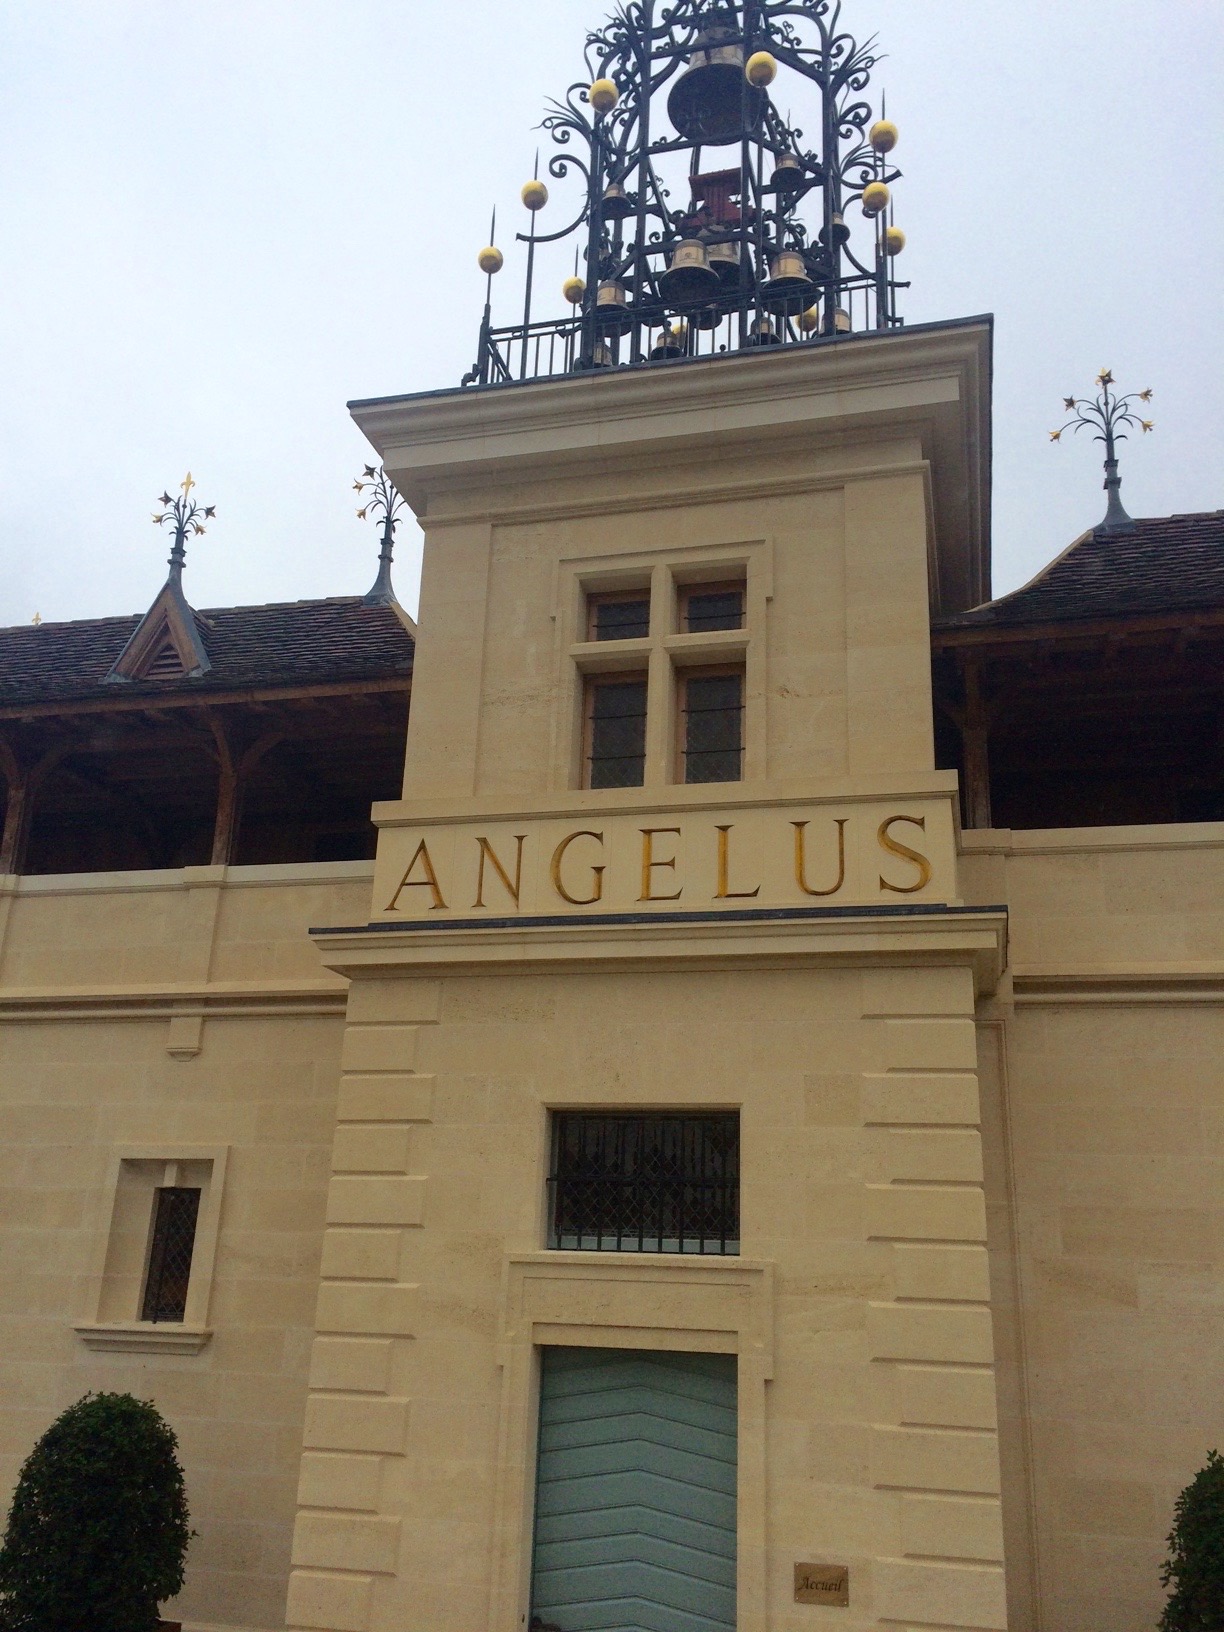 Château Angélus, a Classified First Growth winery, is named for the Mazerat Chapel bells. Photo by Marla Norman.